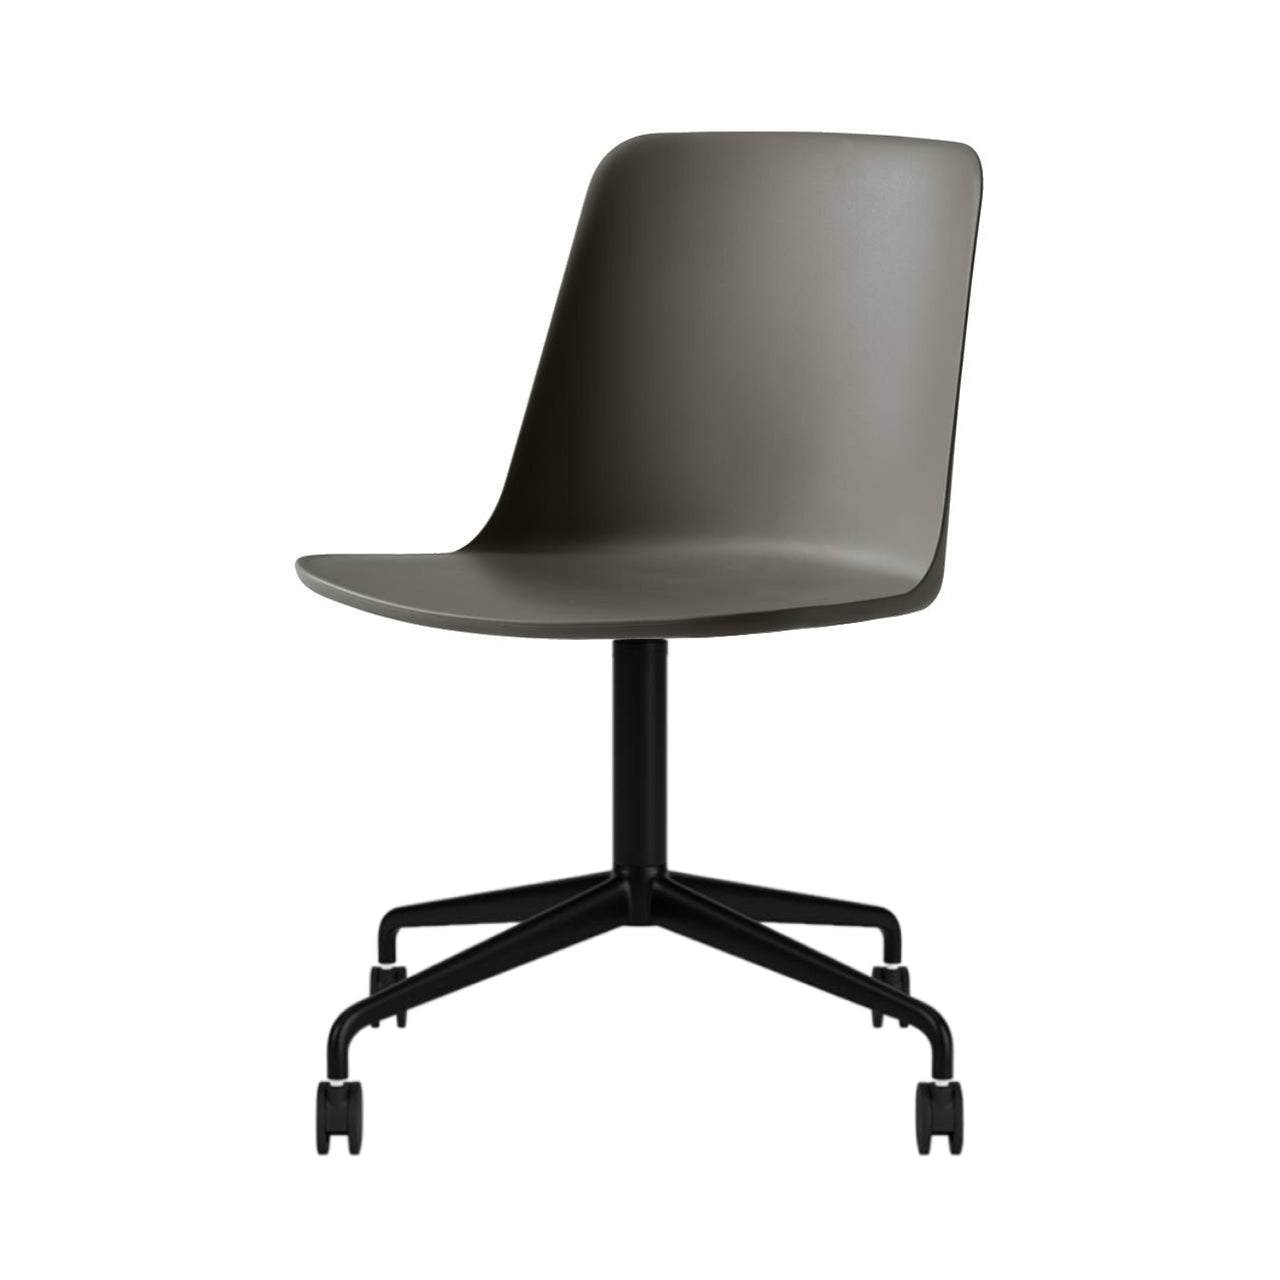 Rely Chair HW21: Stone Grey + Black